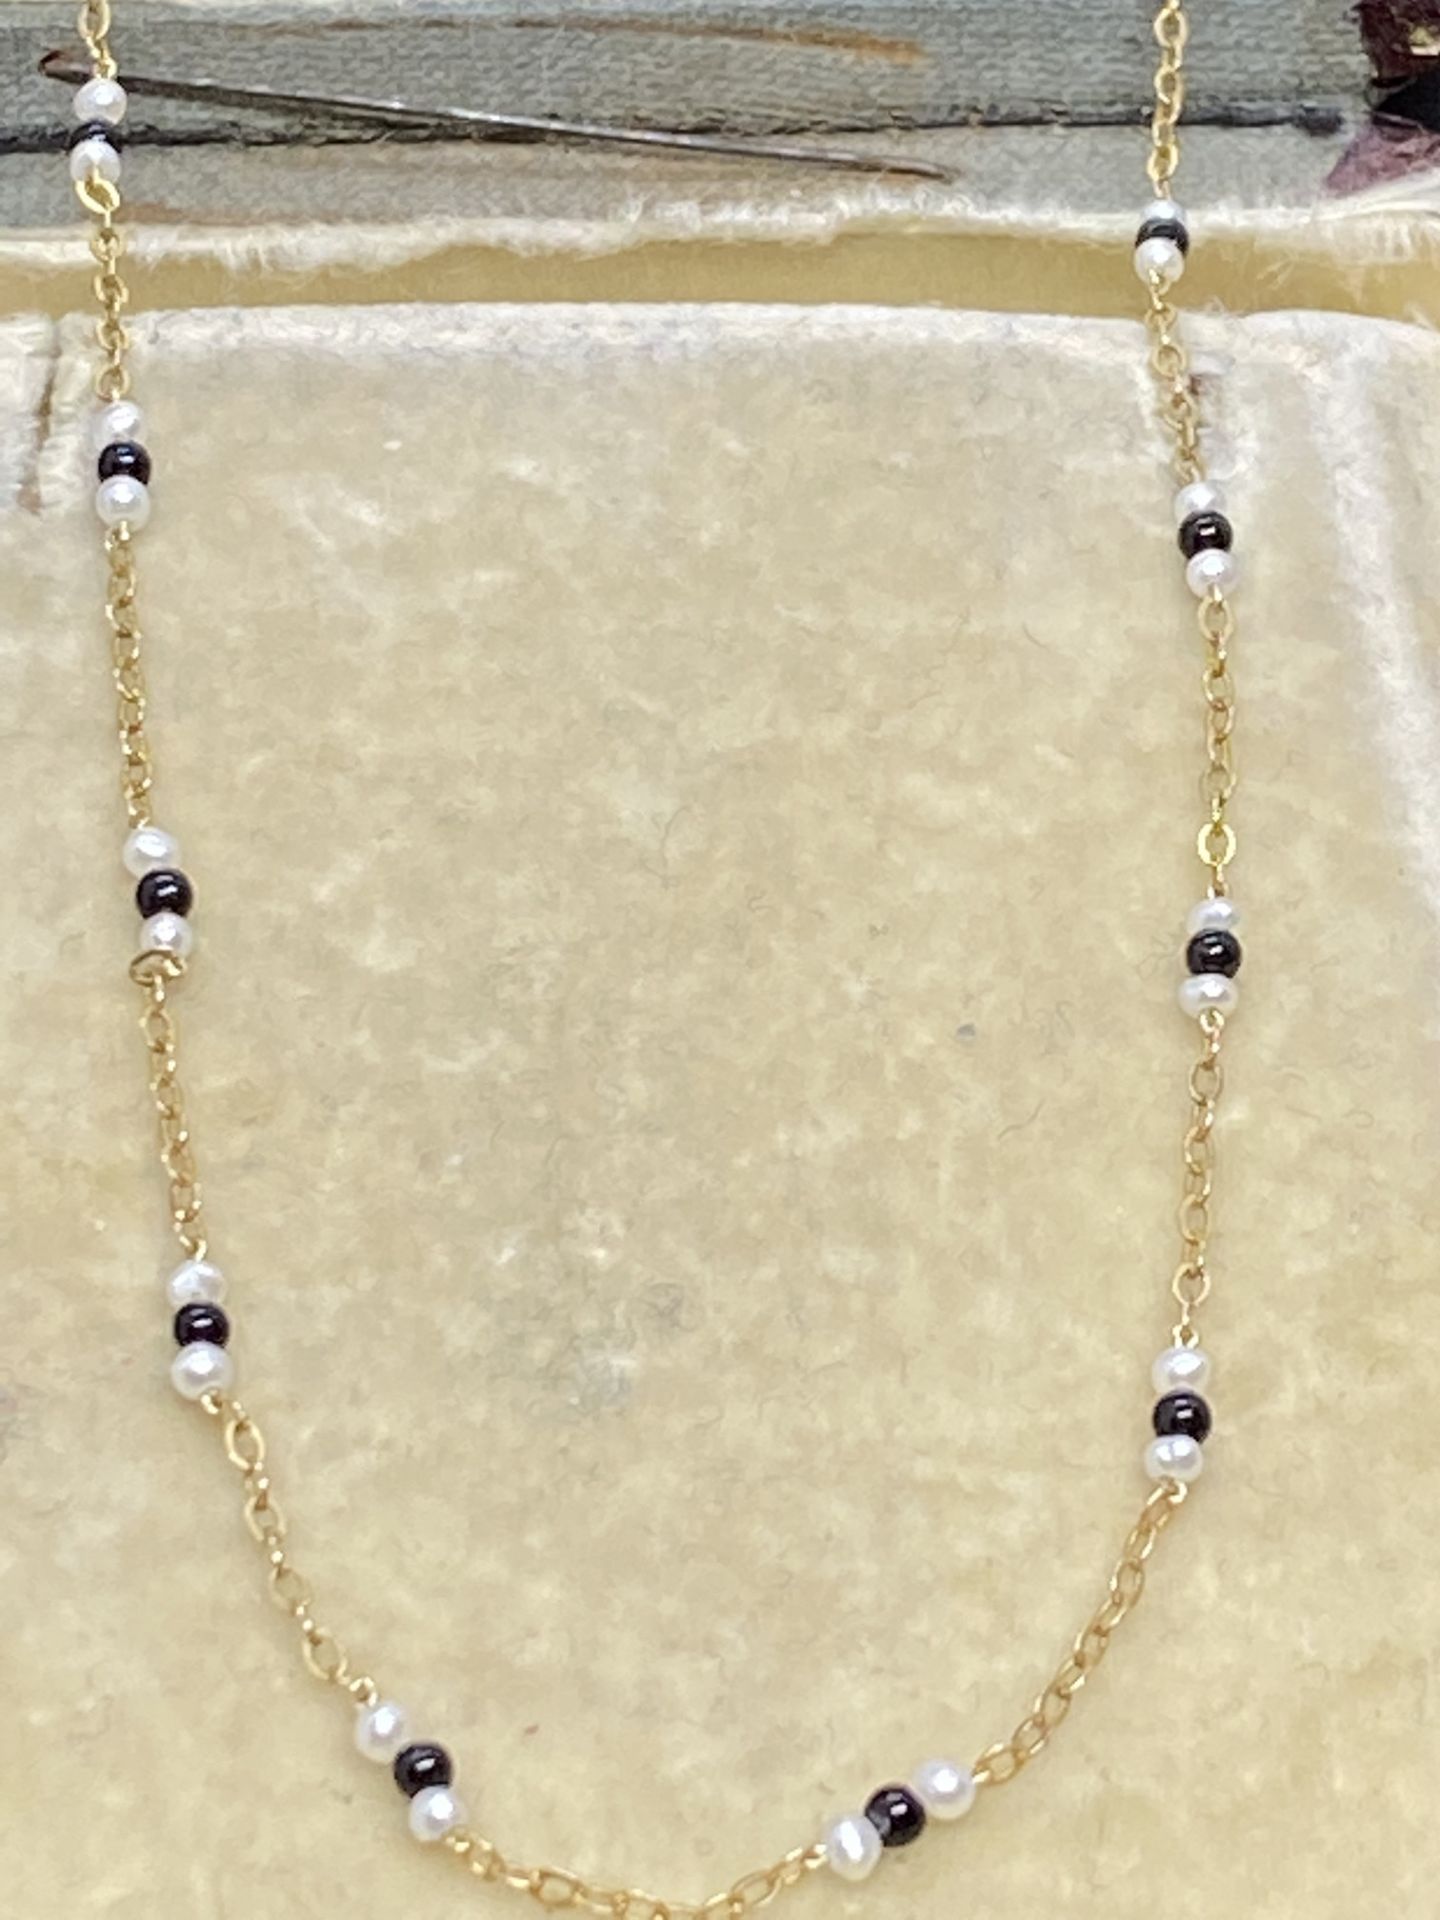 9ct GOLD ONYX & PEARL NECKLACE - Image 2 of 3